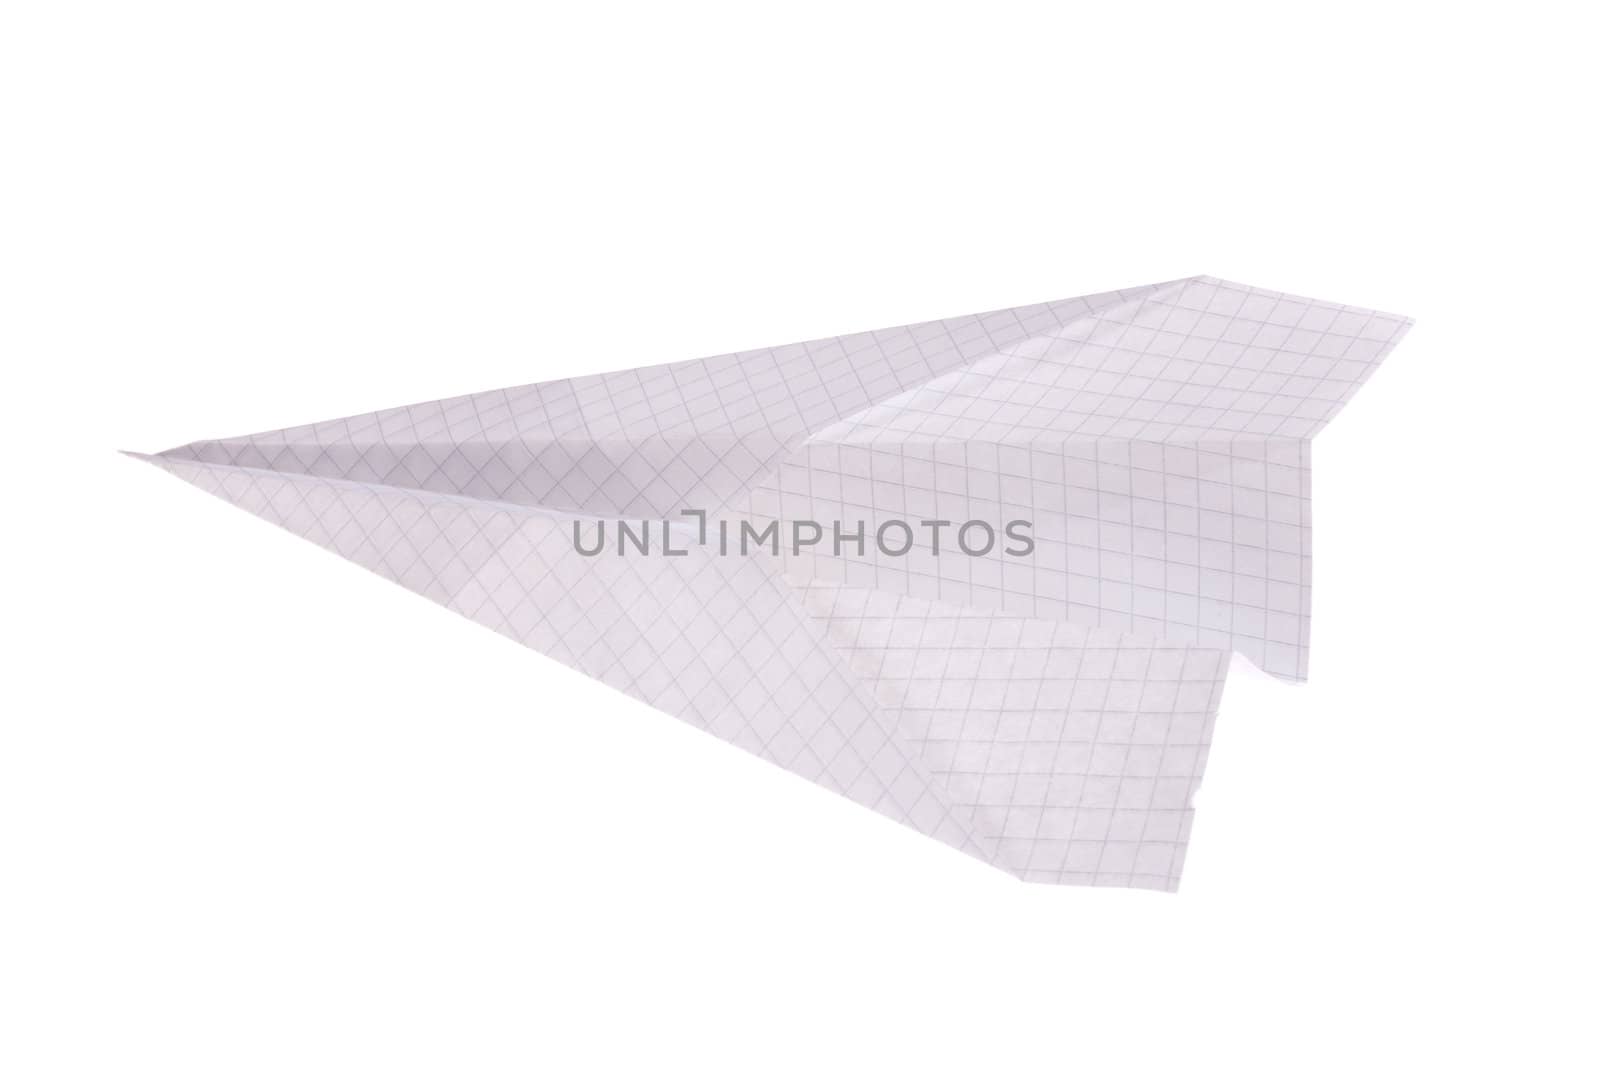 Paper airplane, photo on the white